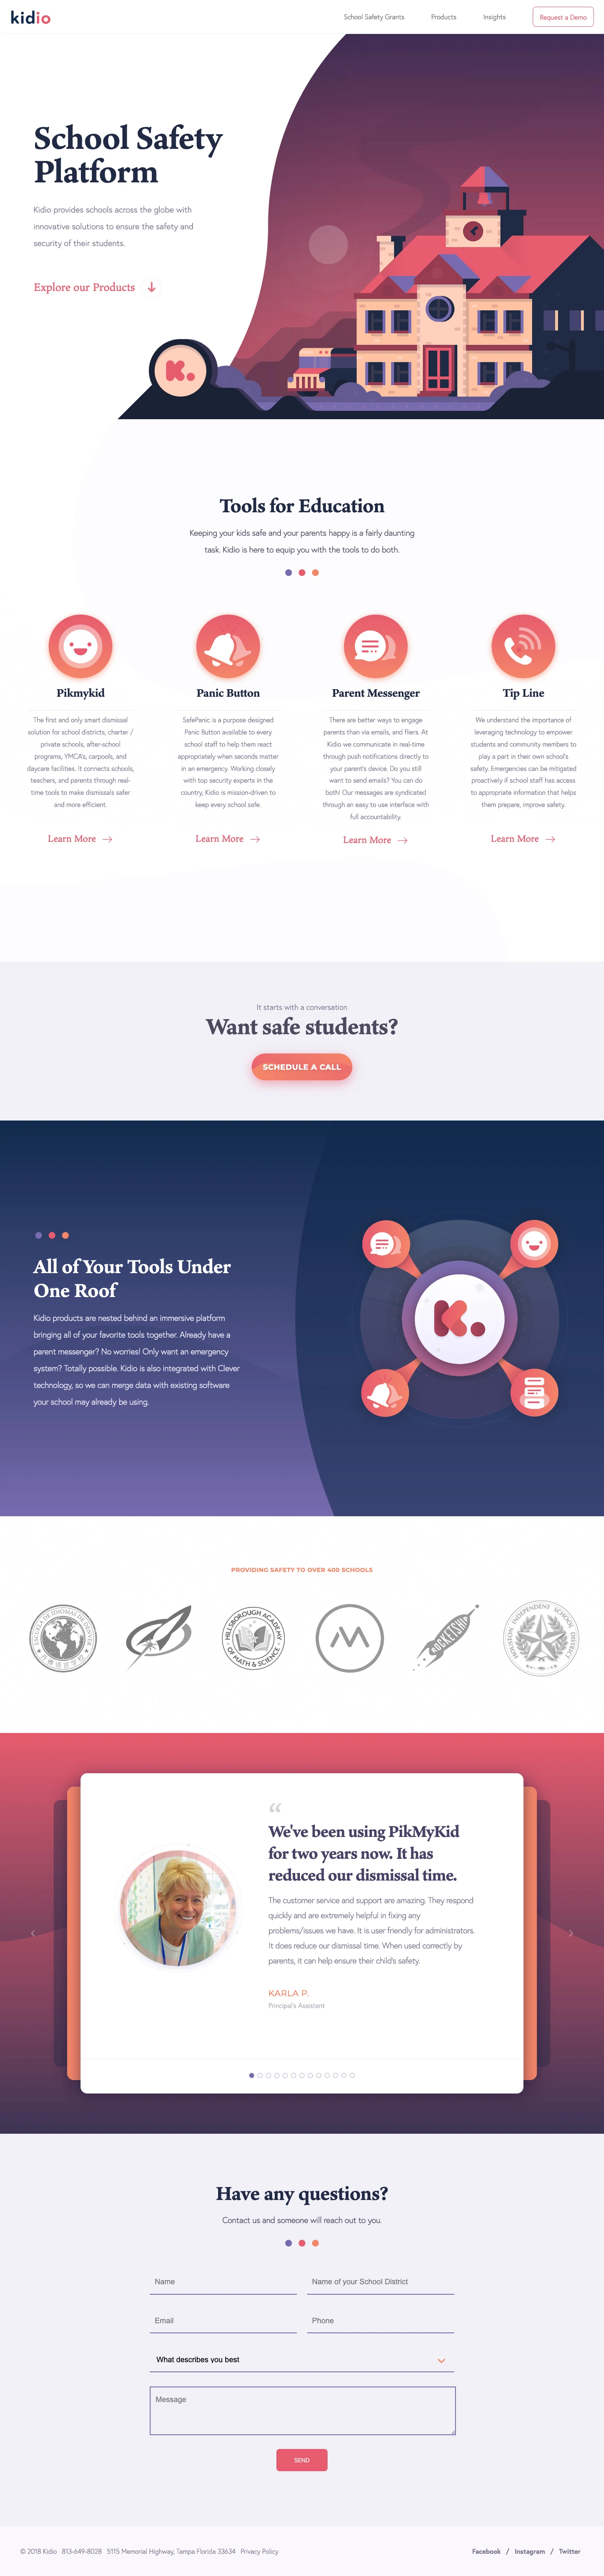 Kidio Landing Page Example: Kidio provides schools across the globe with innovative solutions to ensure the safety and security of their students.